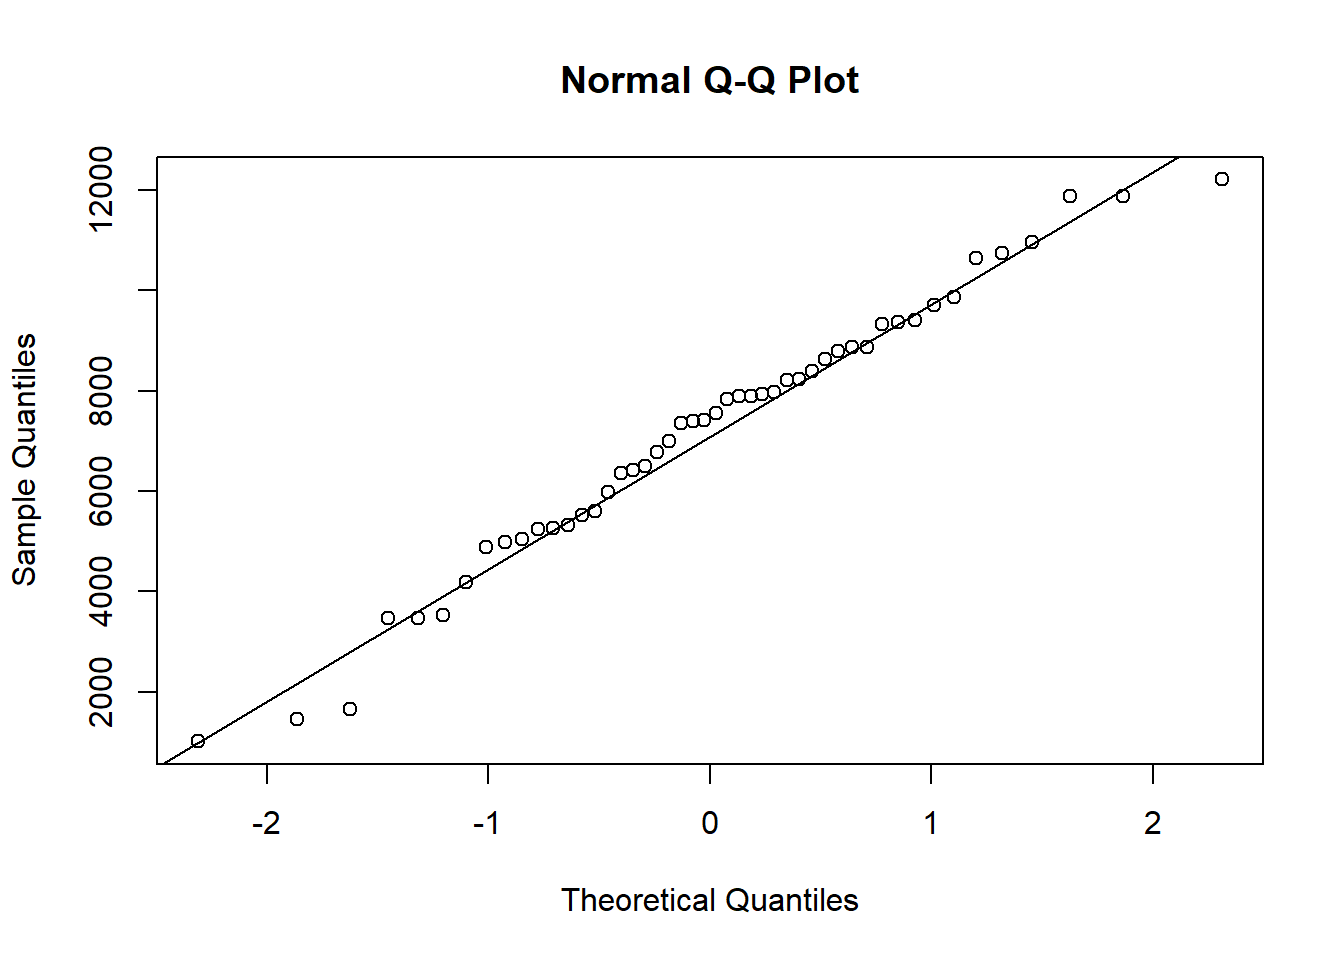 Normal QQ plot of the area variable from the rock data.